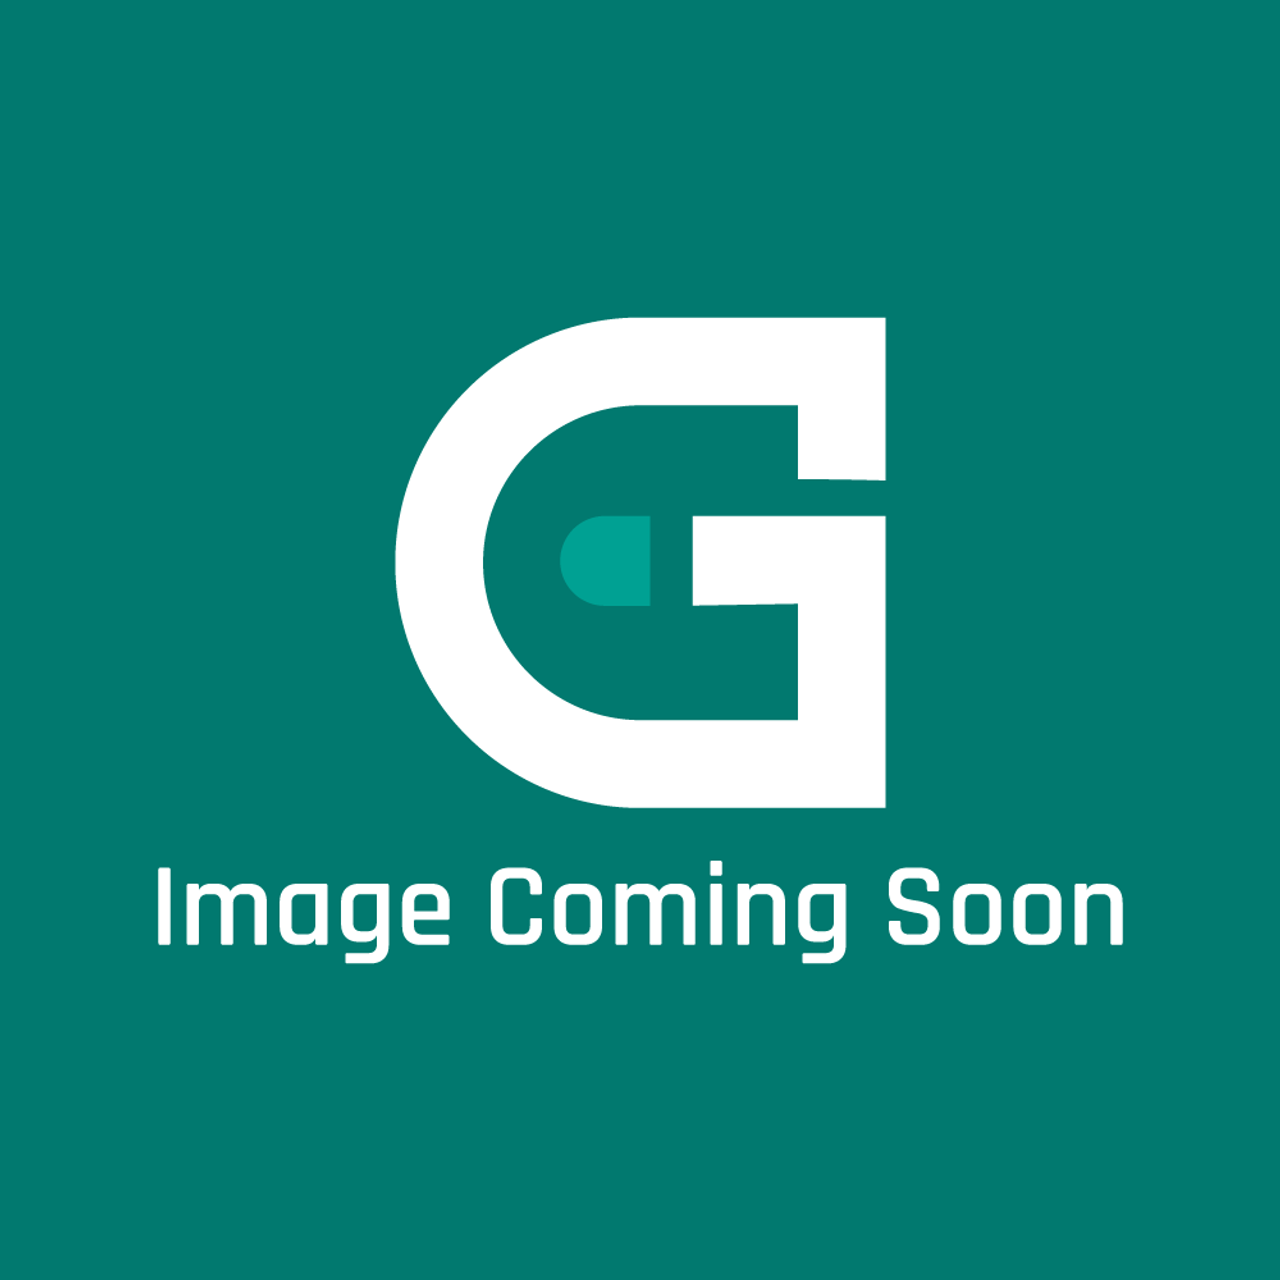 Frigidaire - Electrolux 5304500273 Grate - Image Coming Soon!